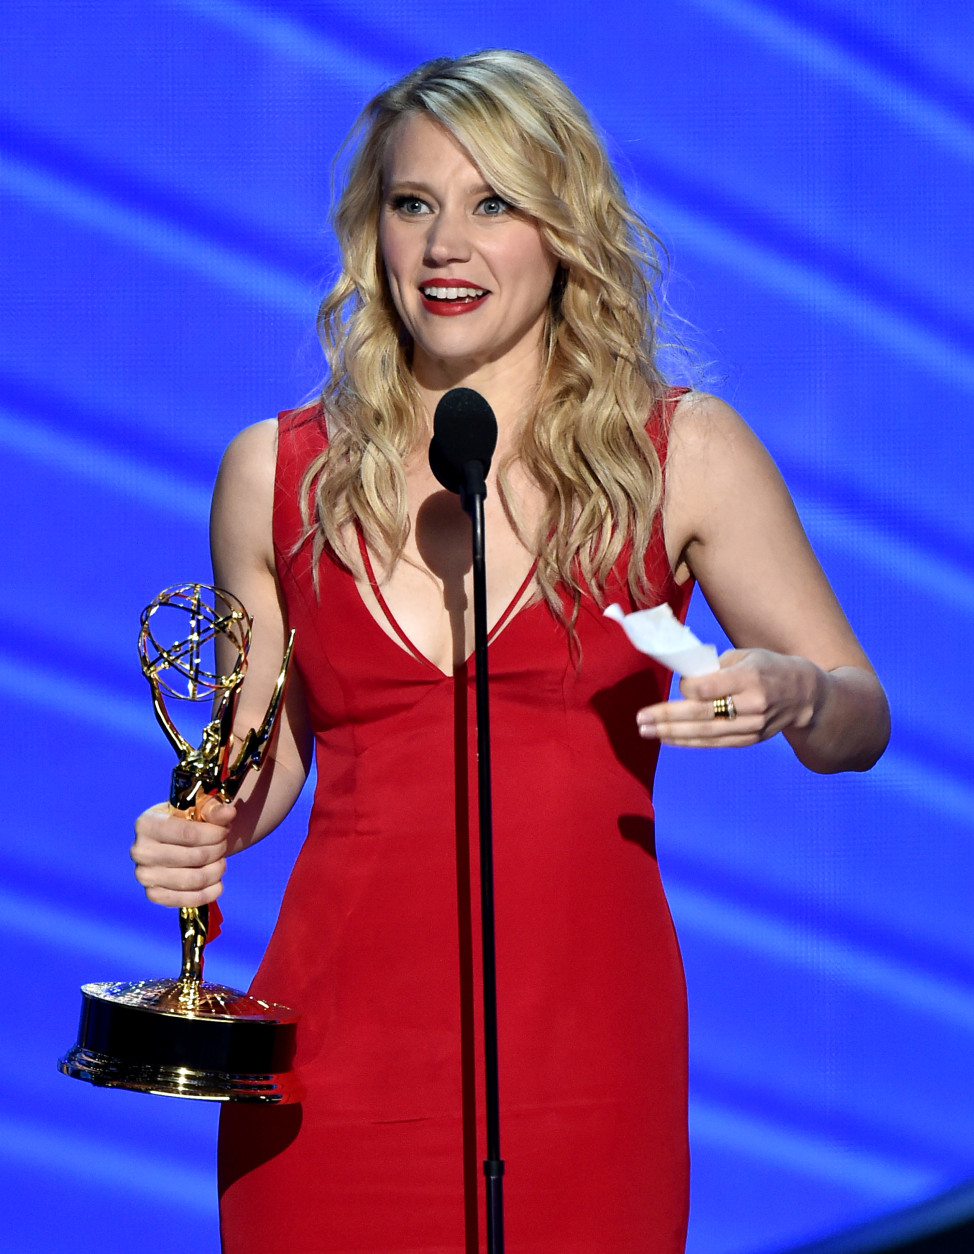 Kate McKinnon accepts the award for outstanding supporting actress in a comedy series for Saturday Night Live at the 68th Primetime Emmy Awards on Sunday, Sept. 18, 2016, at the Microsoft Theater in Los Angeles. (Photo by Vince Bucci/Invision for the Television Academy/AP Images)